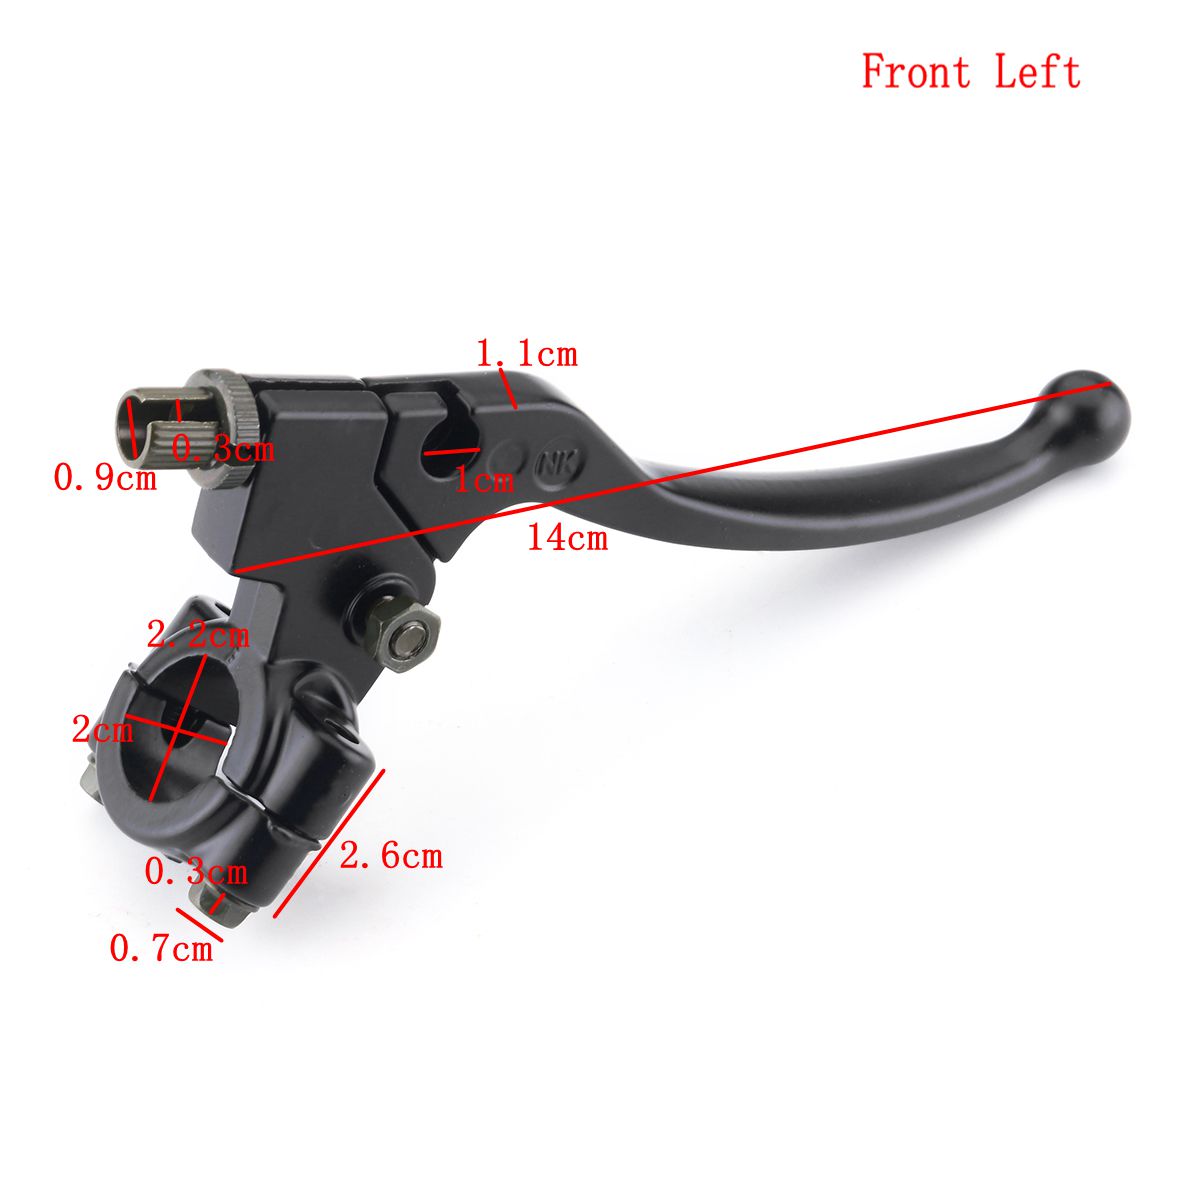 Dark Slate Gray Black Left/Right Front Motorcycle Motorbike Brake Lever Perch Clutch For HONDA C/CR/CRF/XL 1977-2011 2012 2013 2014 2015 2016